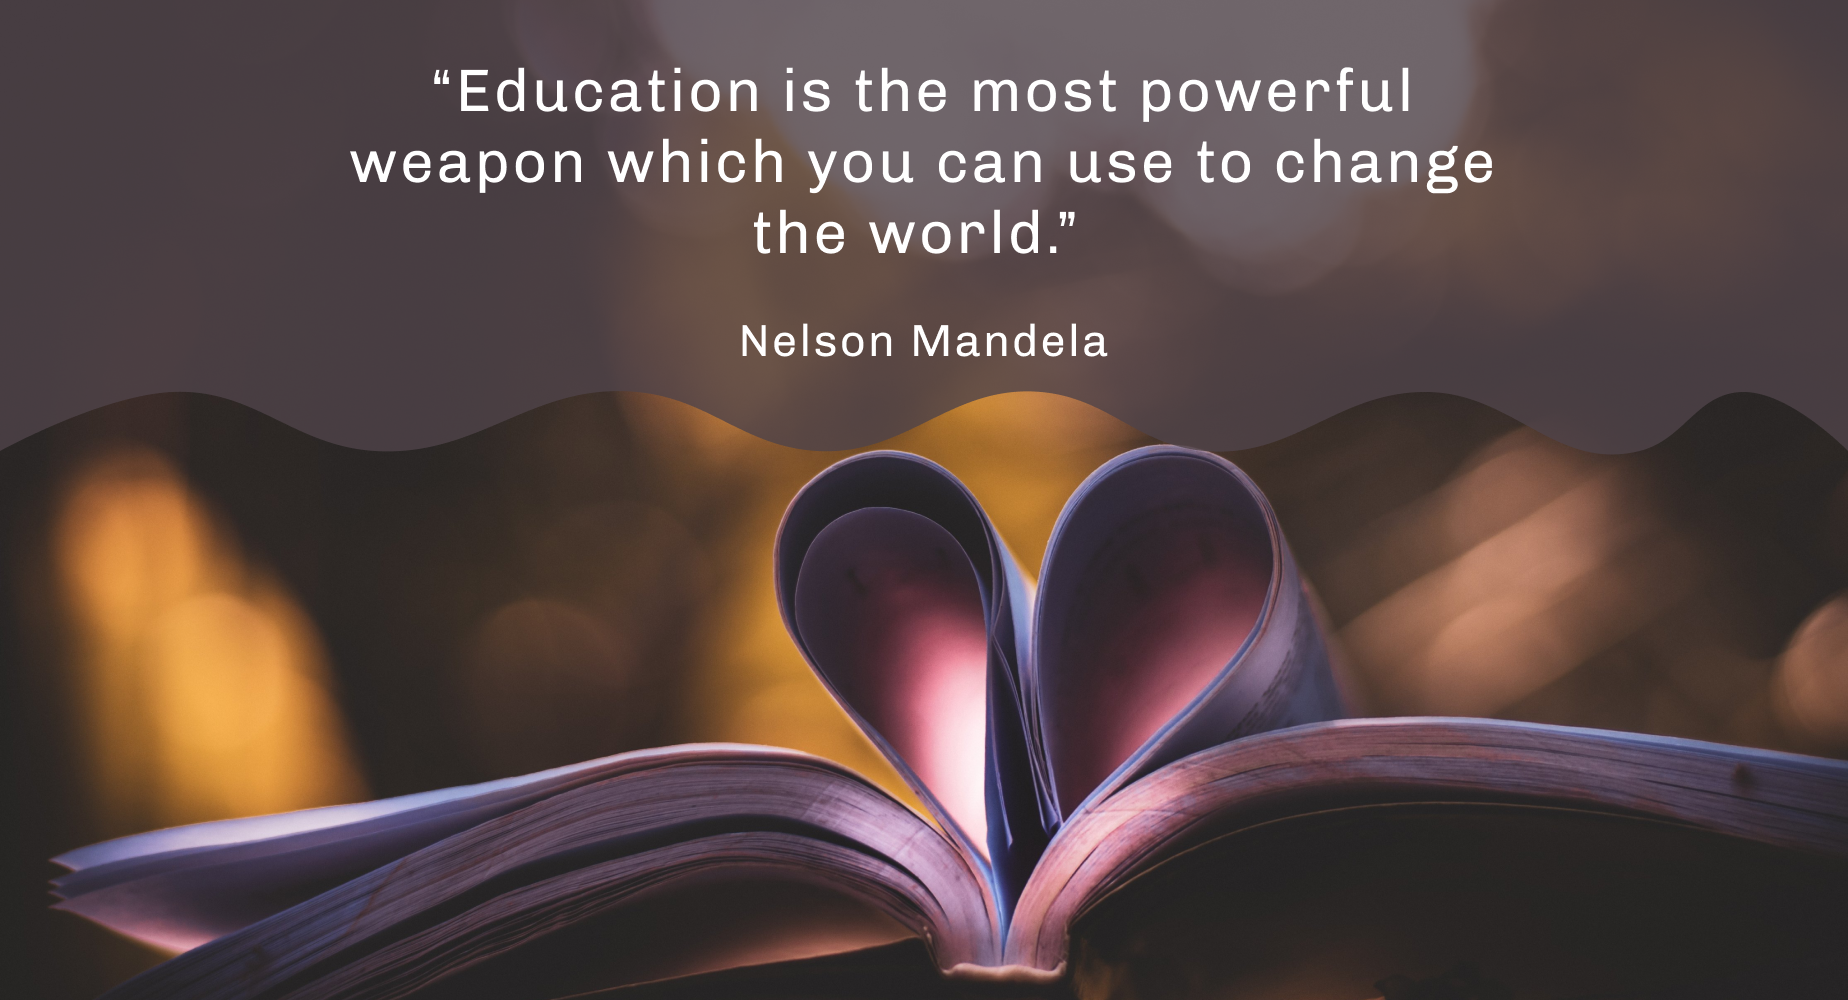 Nelson Mandela motivational quote for students